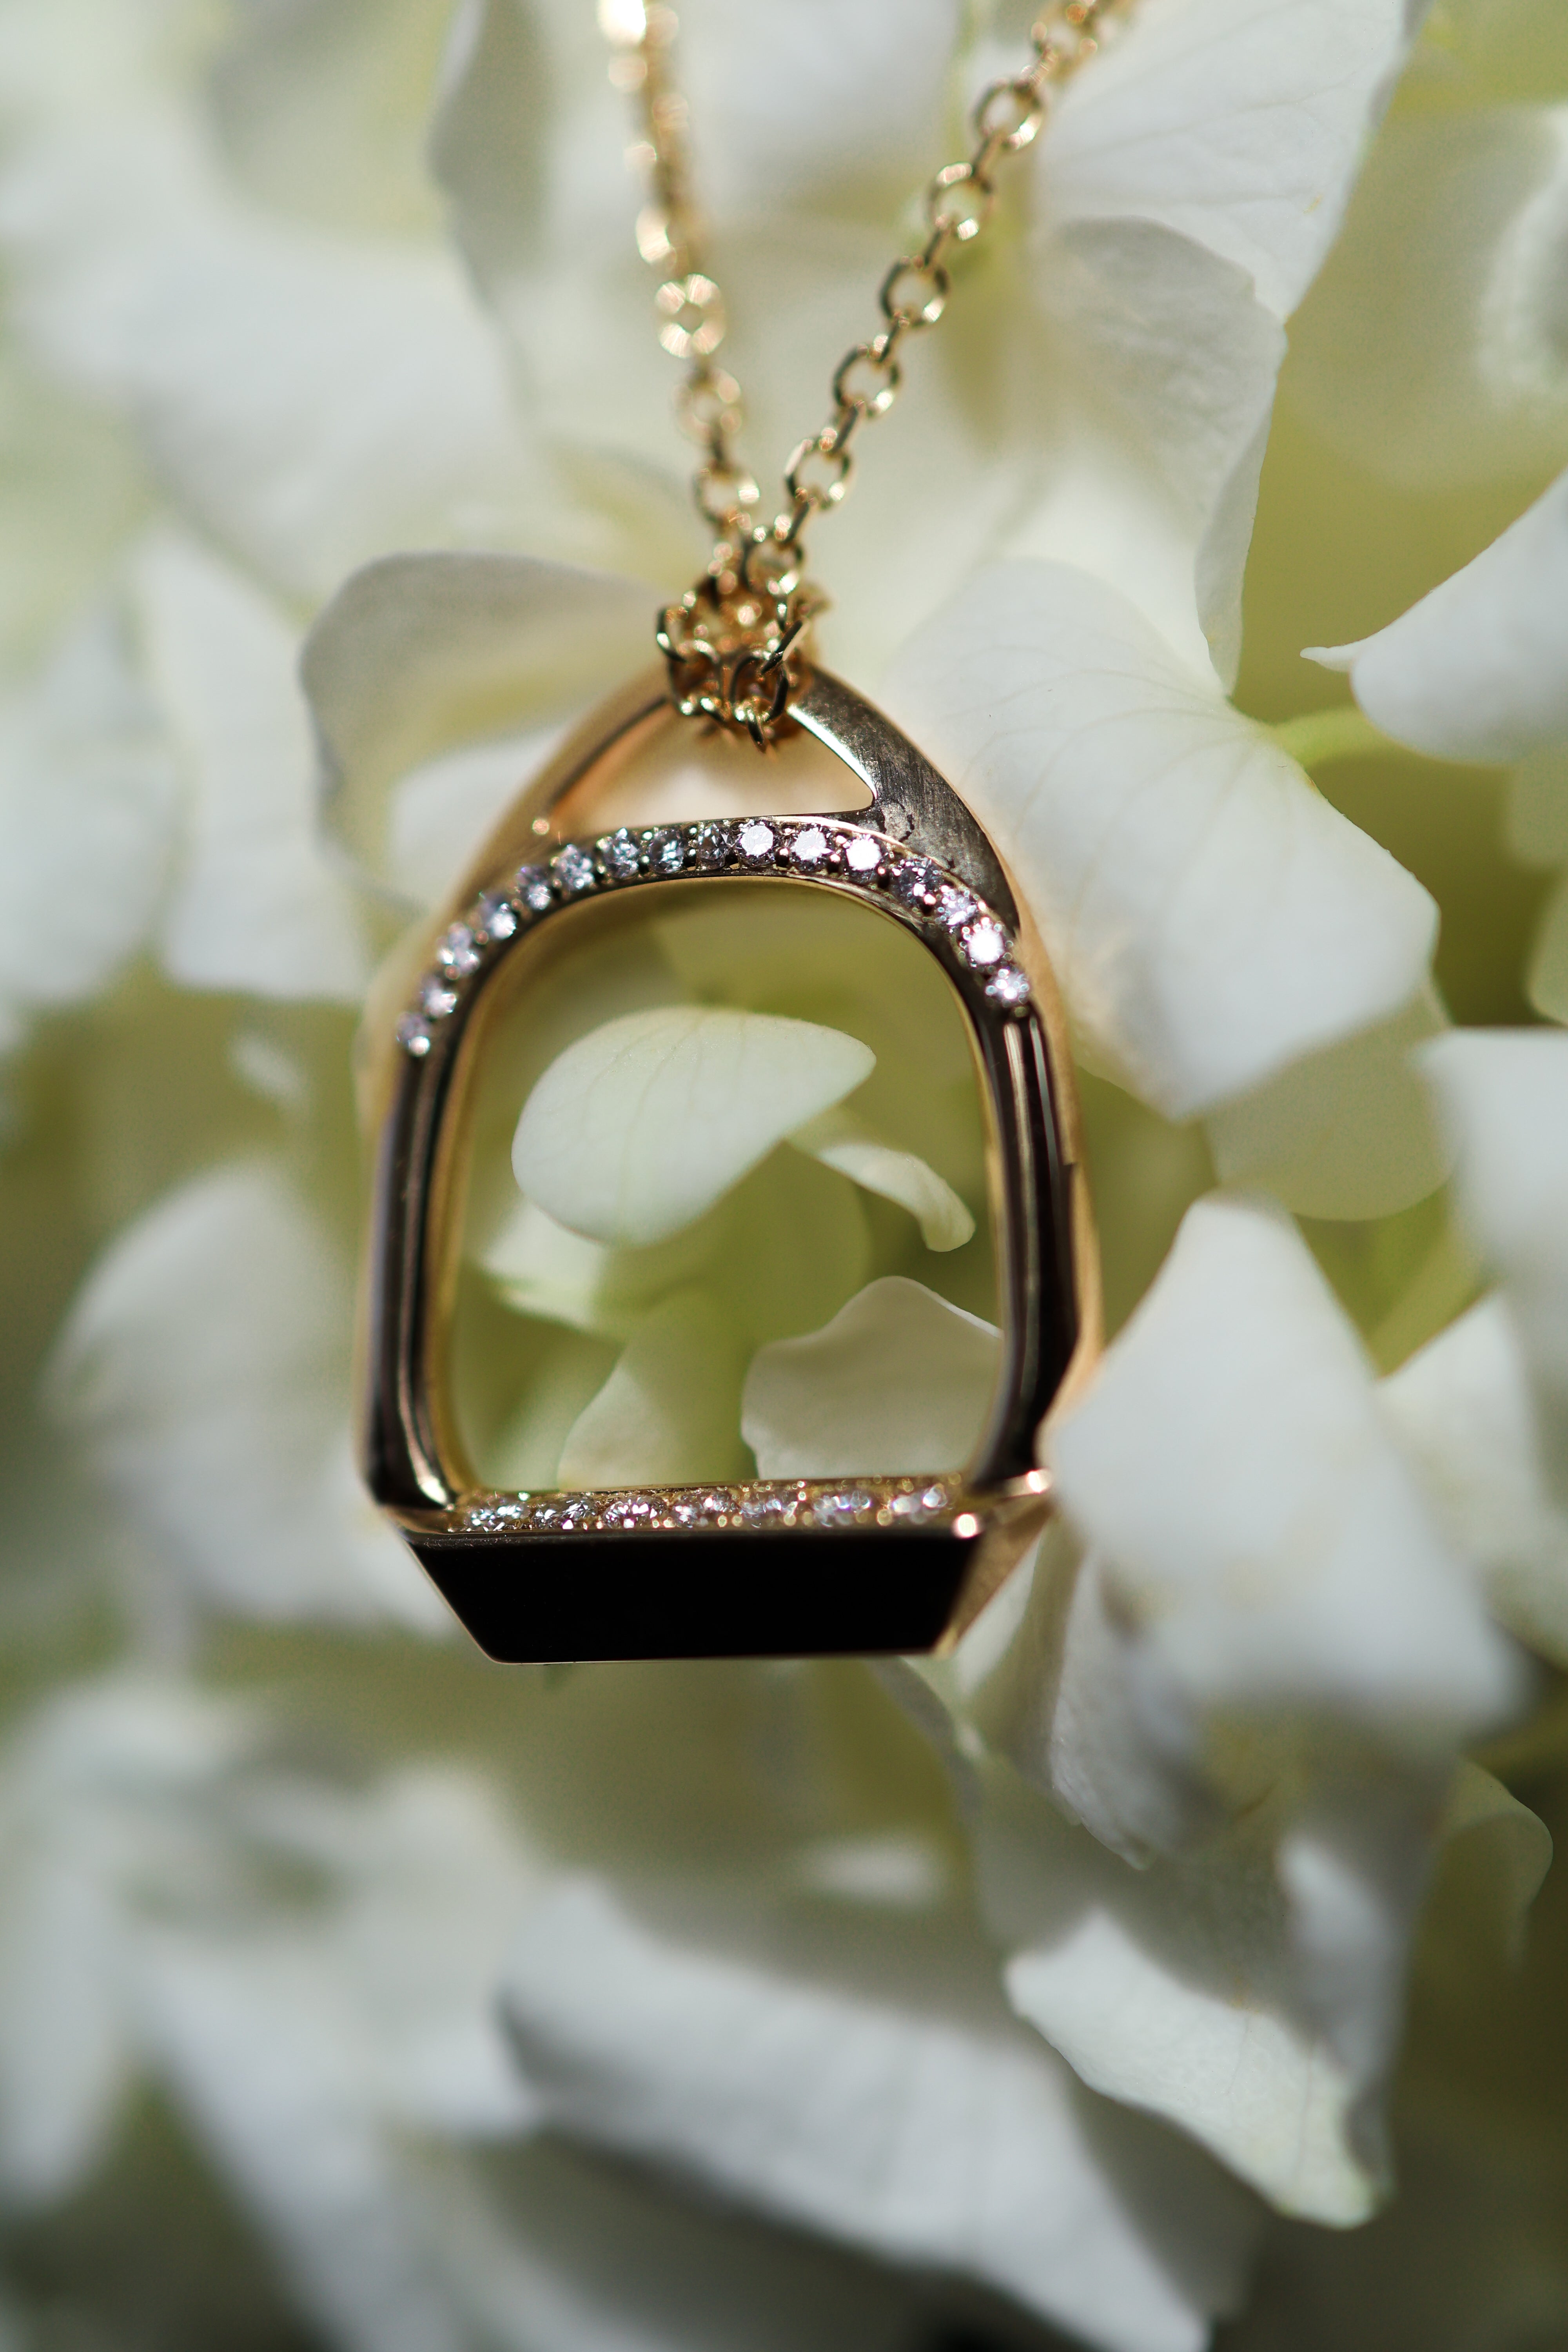 This exquisite stirrup necklace showcases a captivating bridge of front-facing diamonds, flawlessly accentuated by a row of diamonds along the foot pad. The 18k yellow gold chain adds a touch of warmth and sophistication to this enchanting piece.